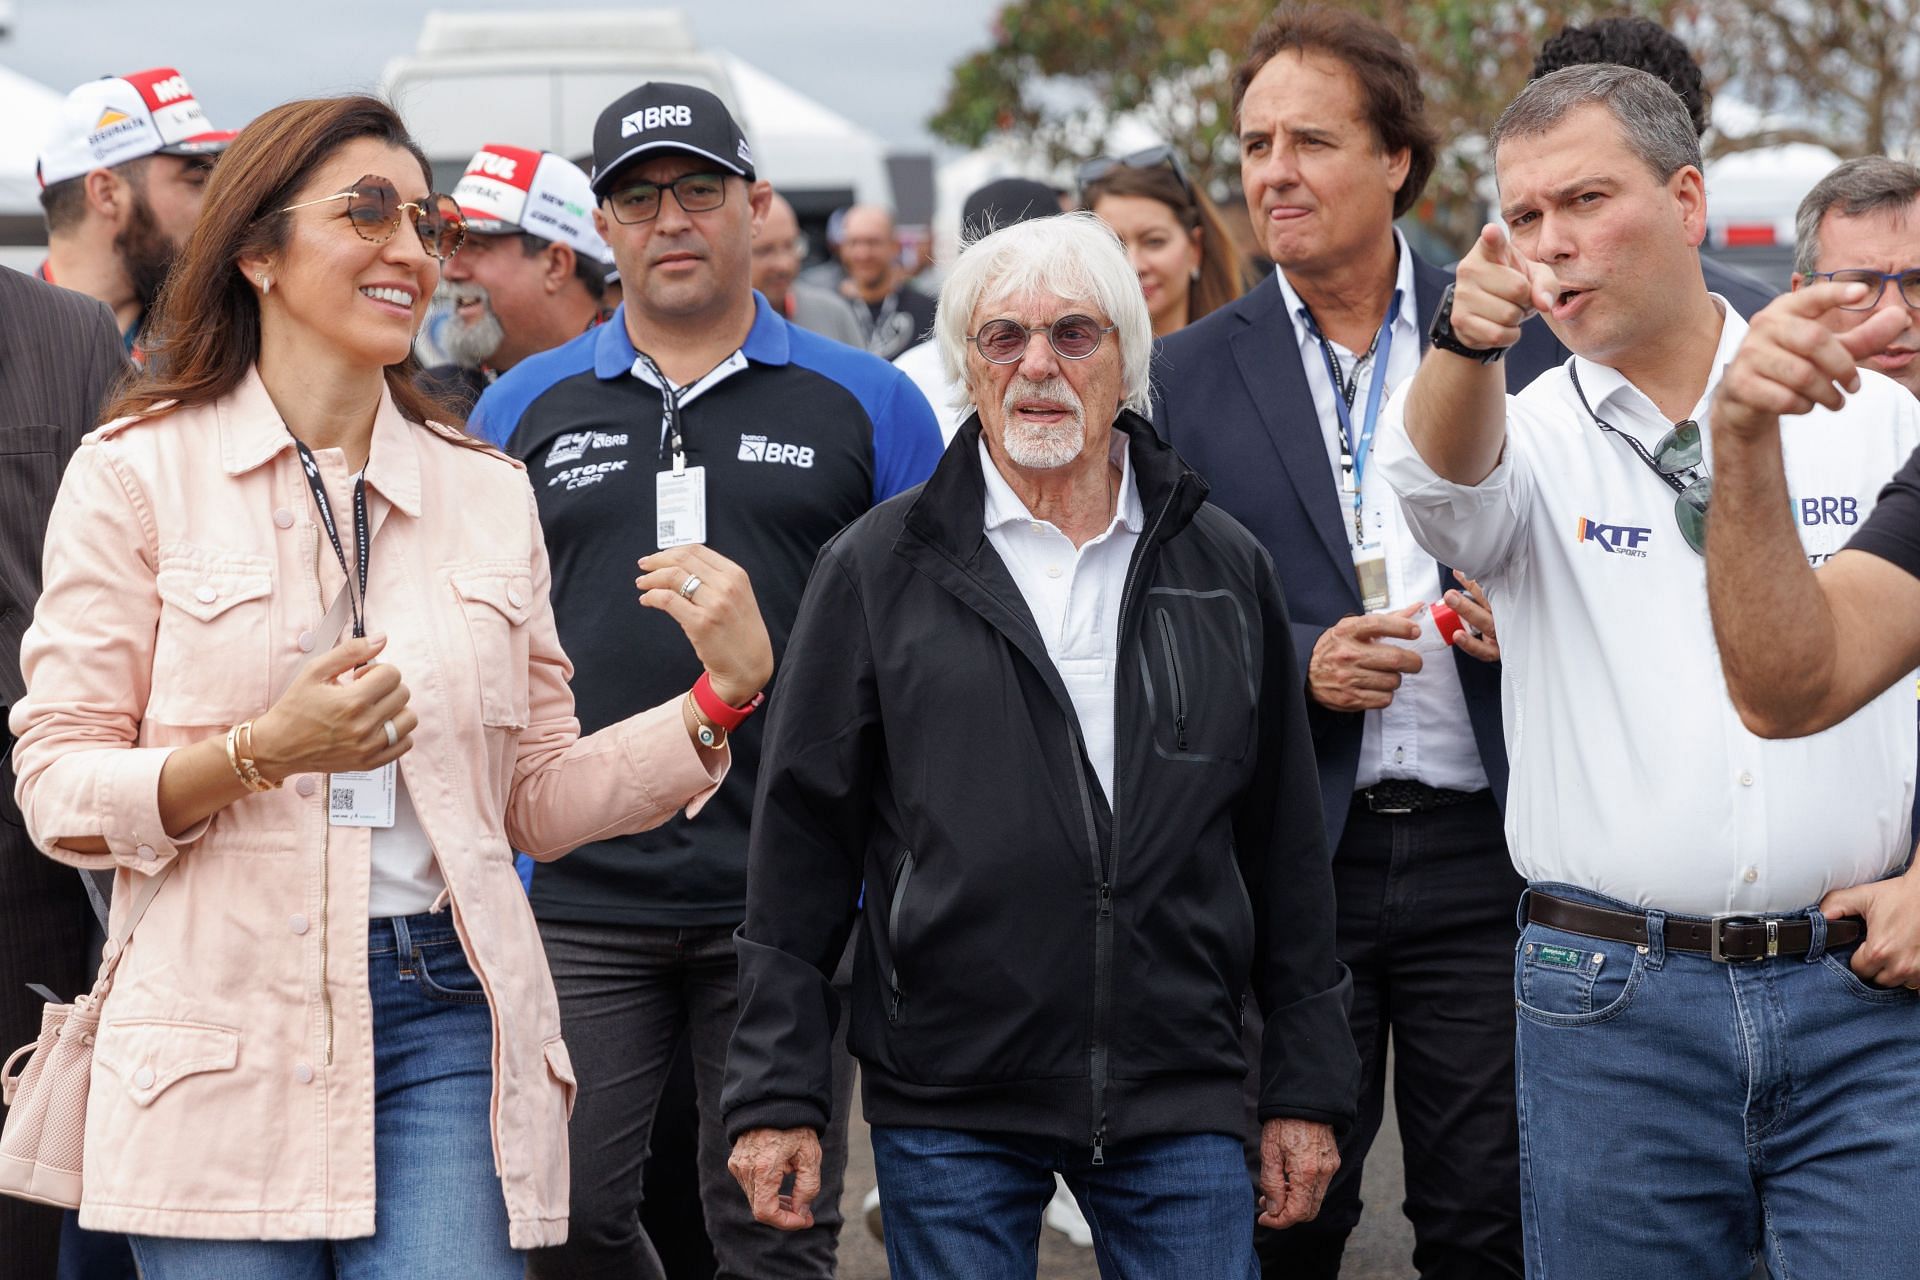 Bernie Ecclestone has pleaded not guilty to fraud charges.